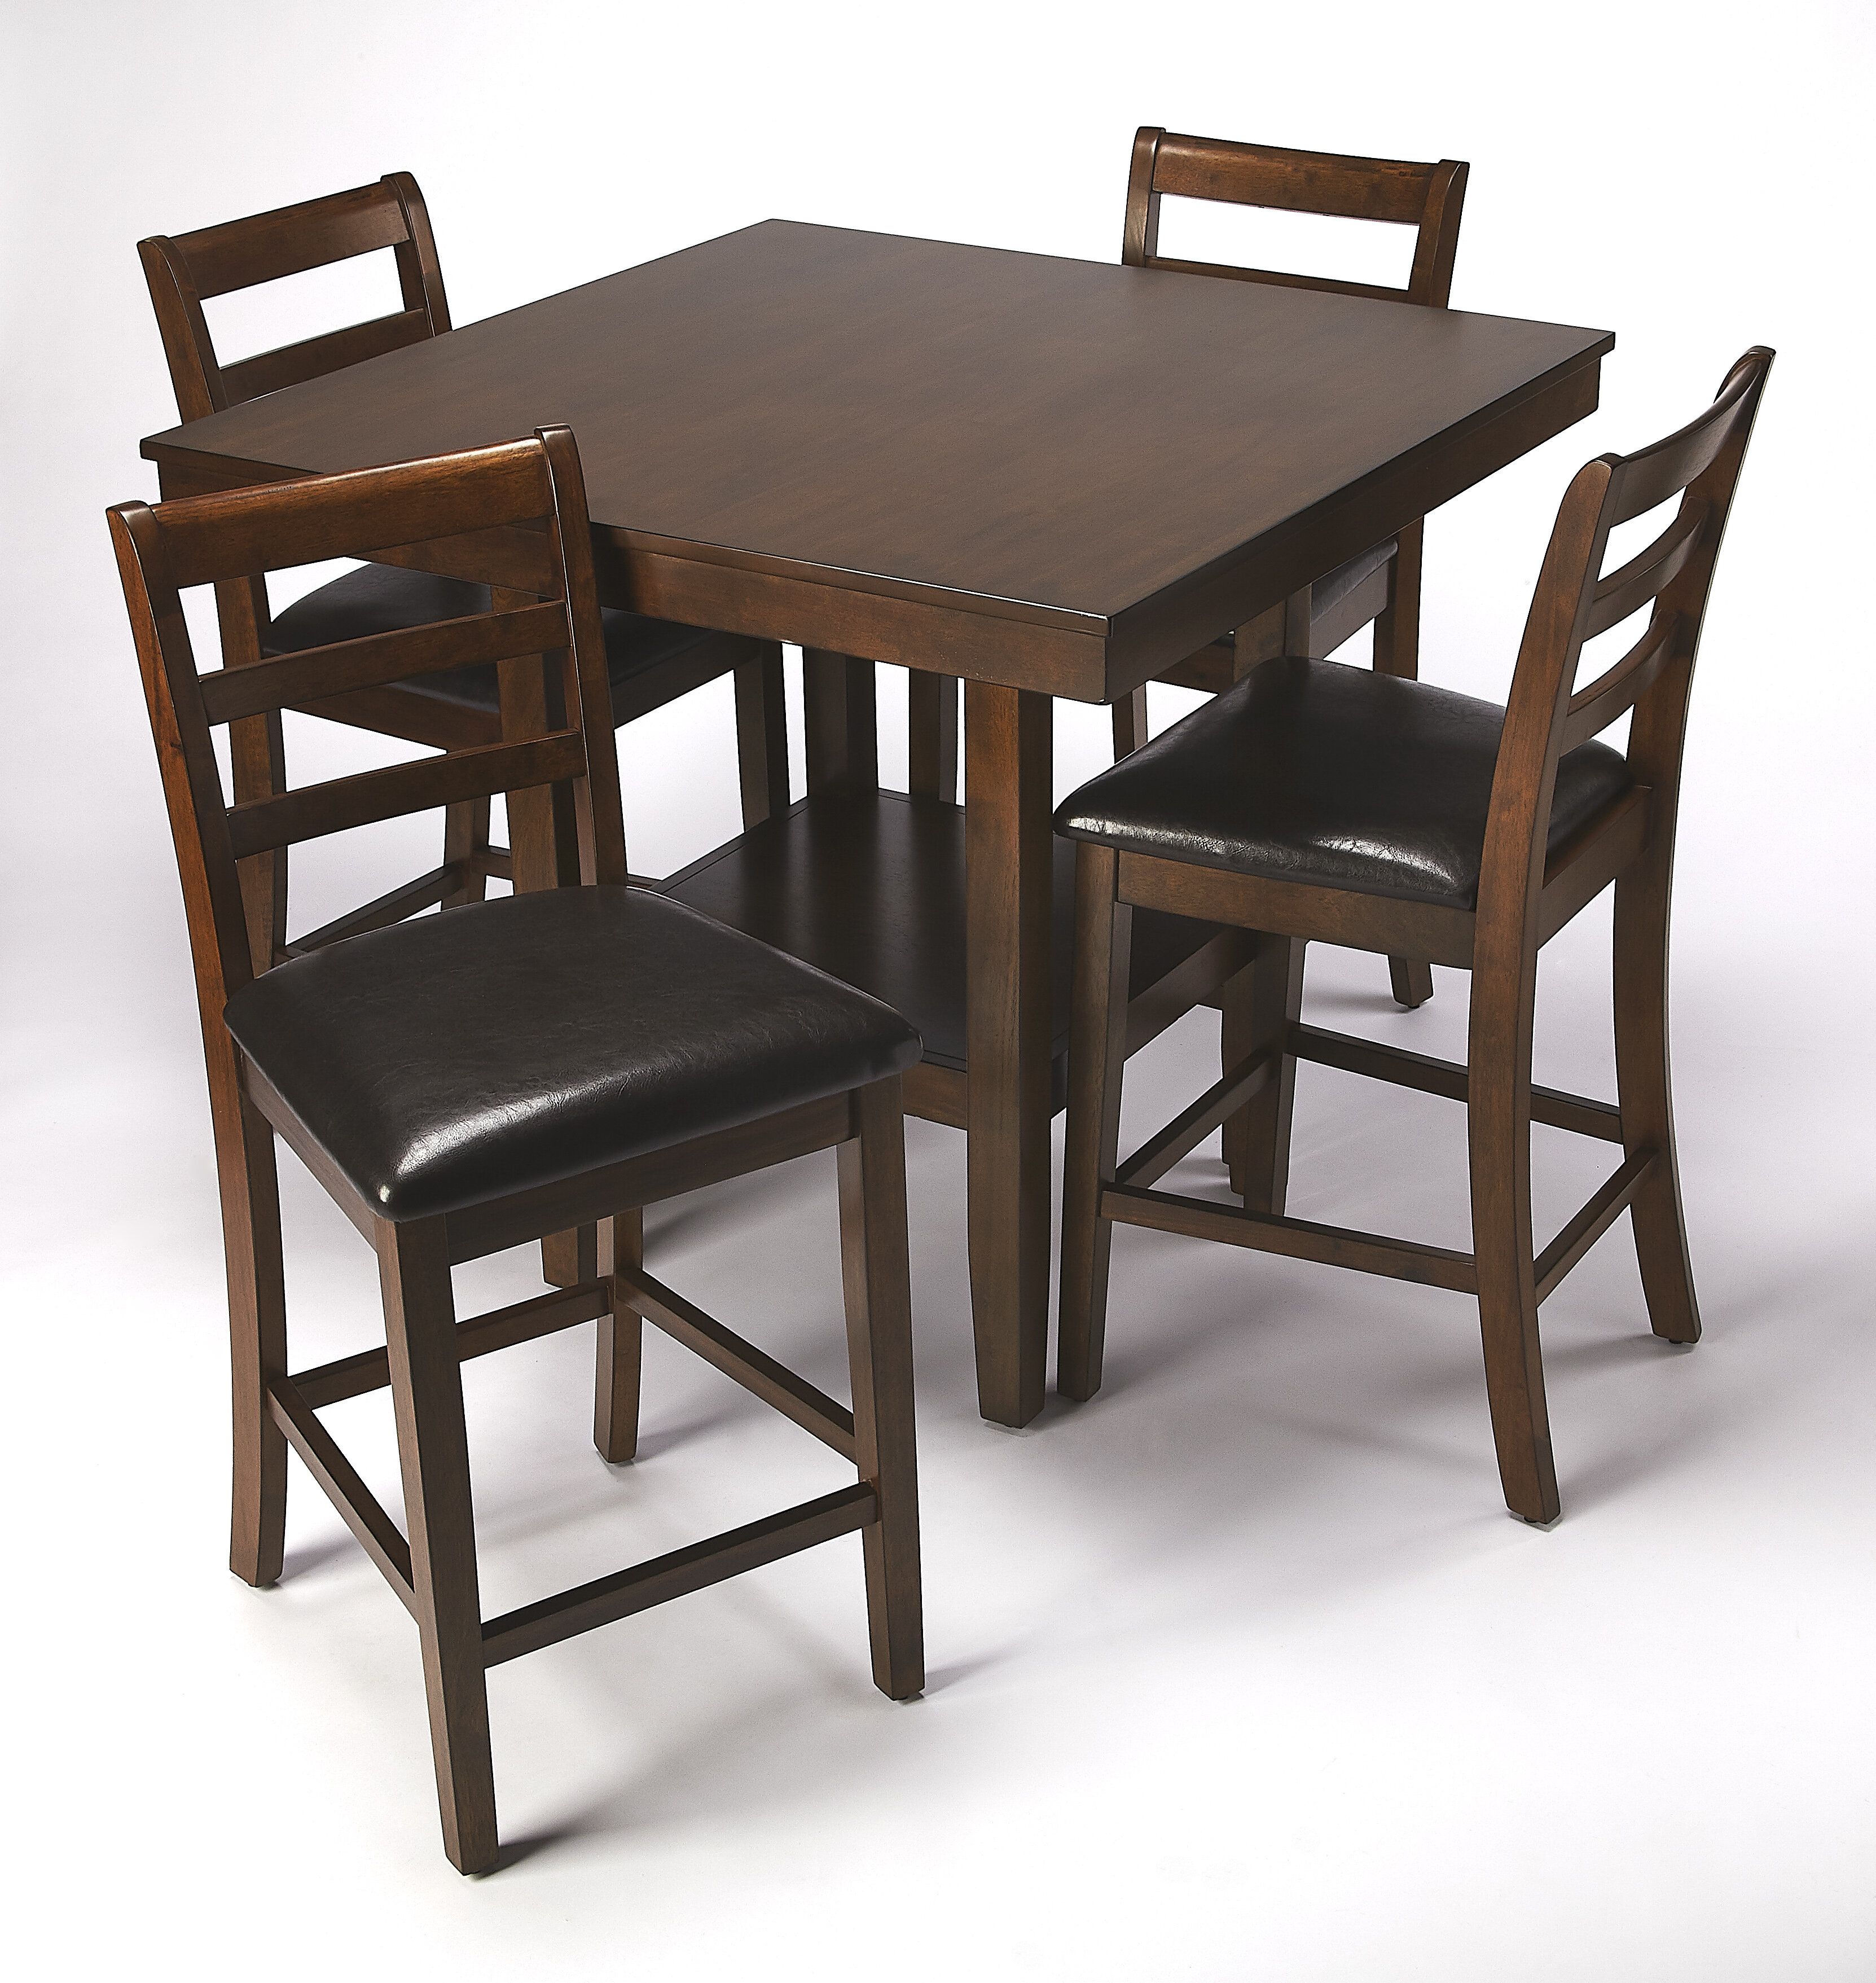 Sigler 5 Piece Dining Set With Most Popular Emmeline 5 Piece Breakfast Nook Dining Sets (View 9 of 20)